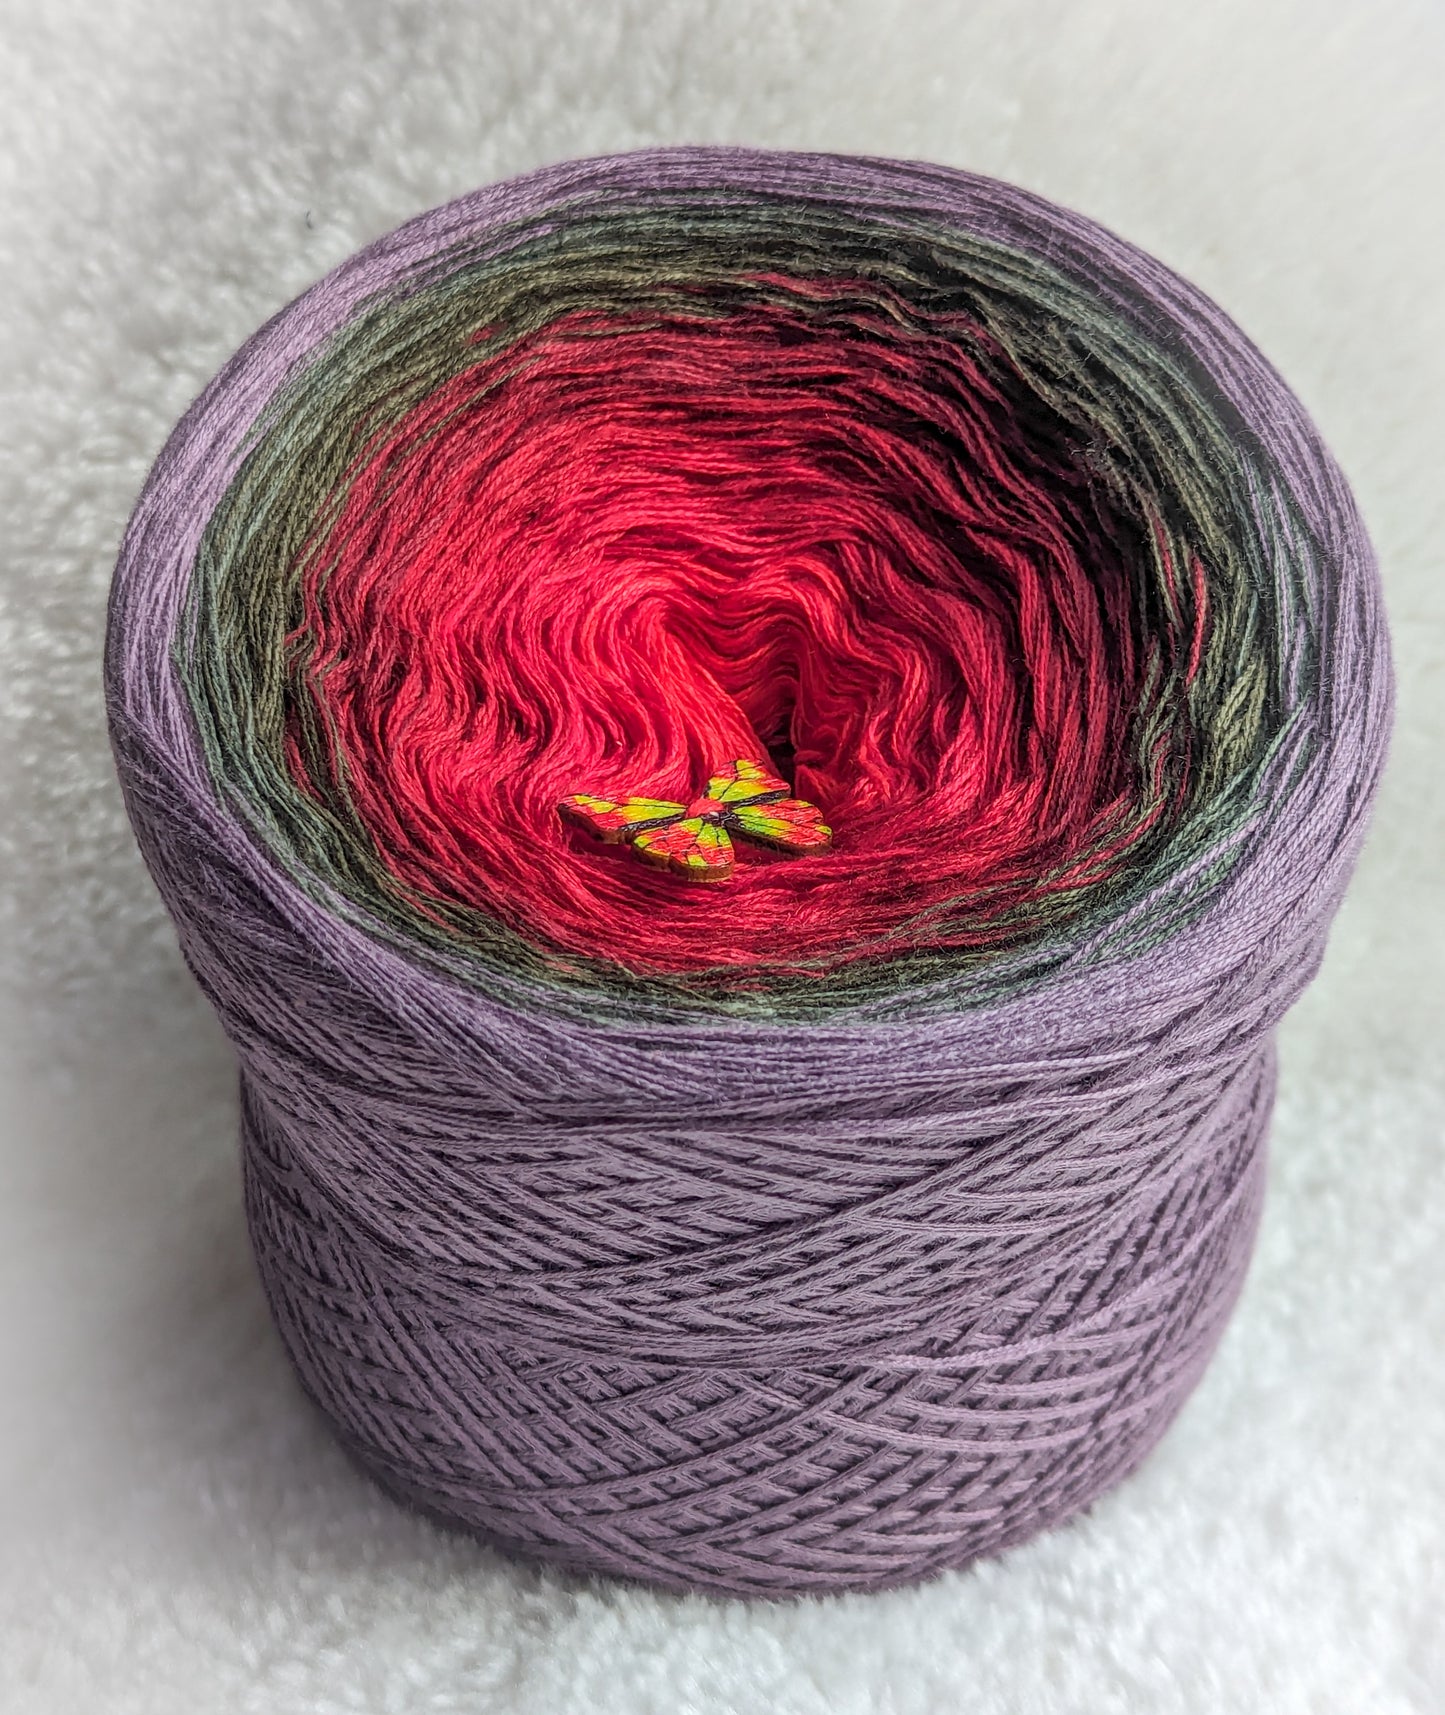 "Poppy field" cotton/acrylic ombre yarn cake, 285g, about 1400m, 3ply, normal style